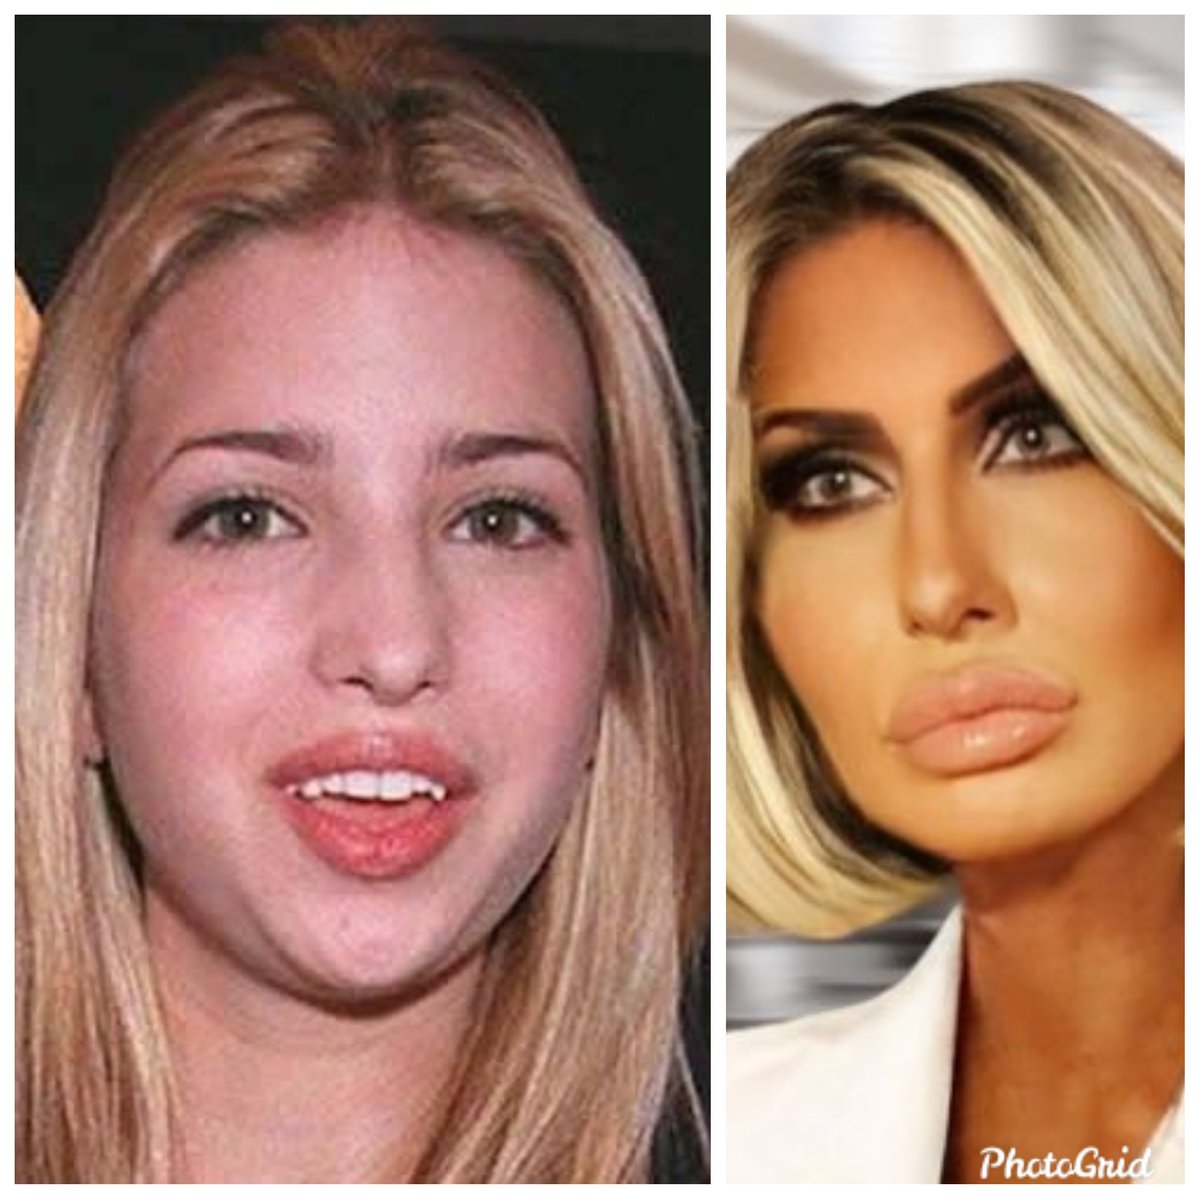 @JebraFaushay @GuntherEagleman Before and after sex with Donald J. Trump Sr. - 45th resident of the White House, perennial whiner, wearer of perpetually full, excrement-leaking diapers, thief of national secrets, sexual abuser of 26 women and girls, business fraudster, serial liar & ra(p/c)ist